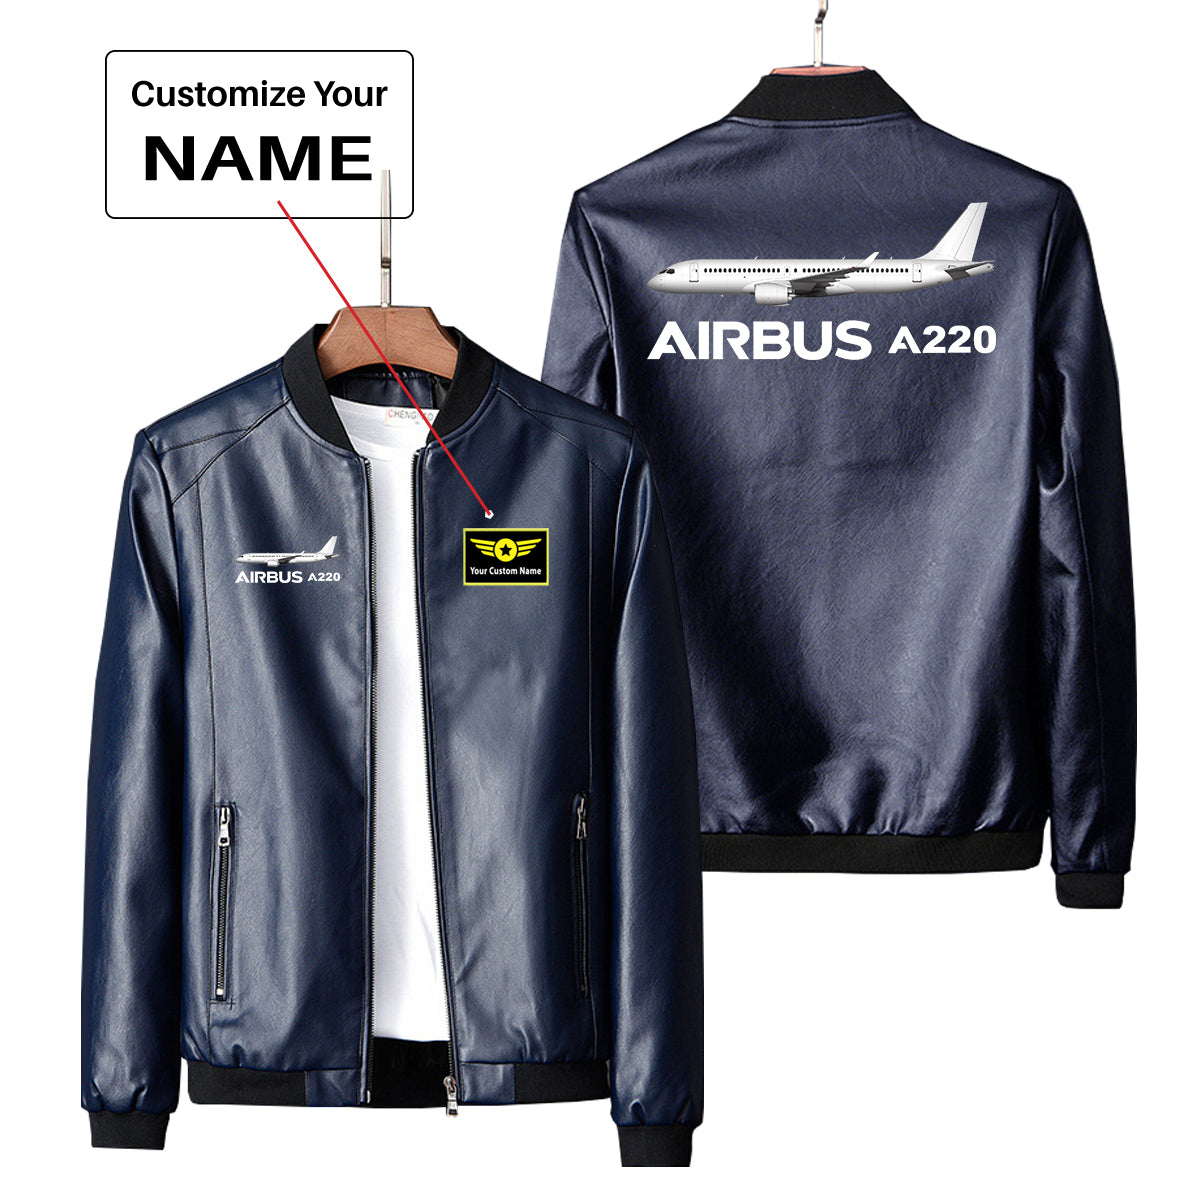 The Airbus A220 Designed PU Leather Jackets